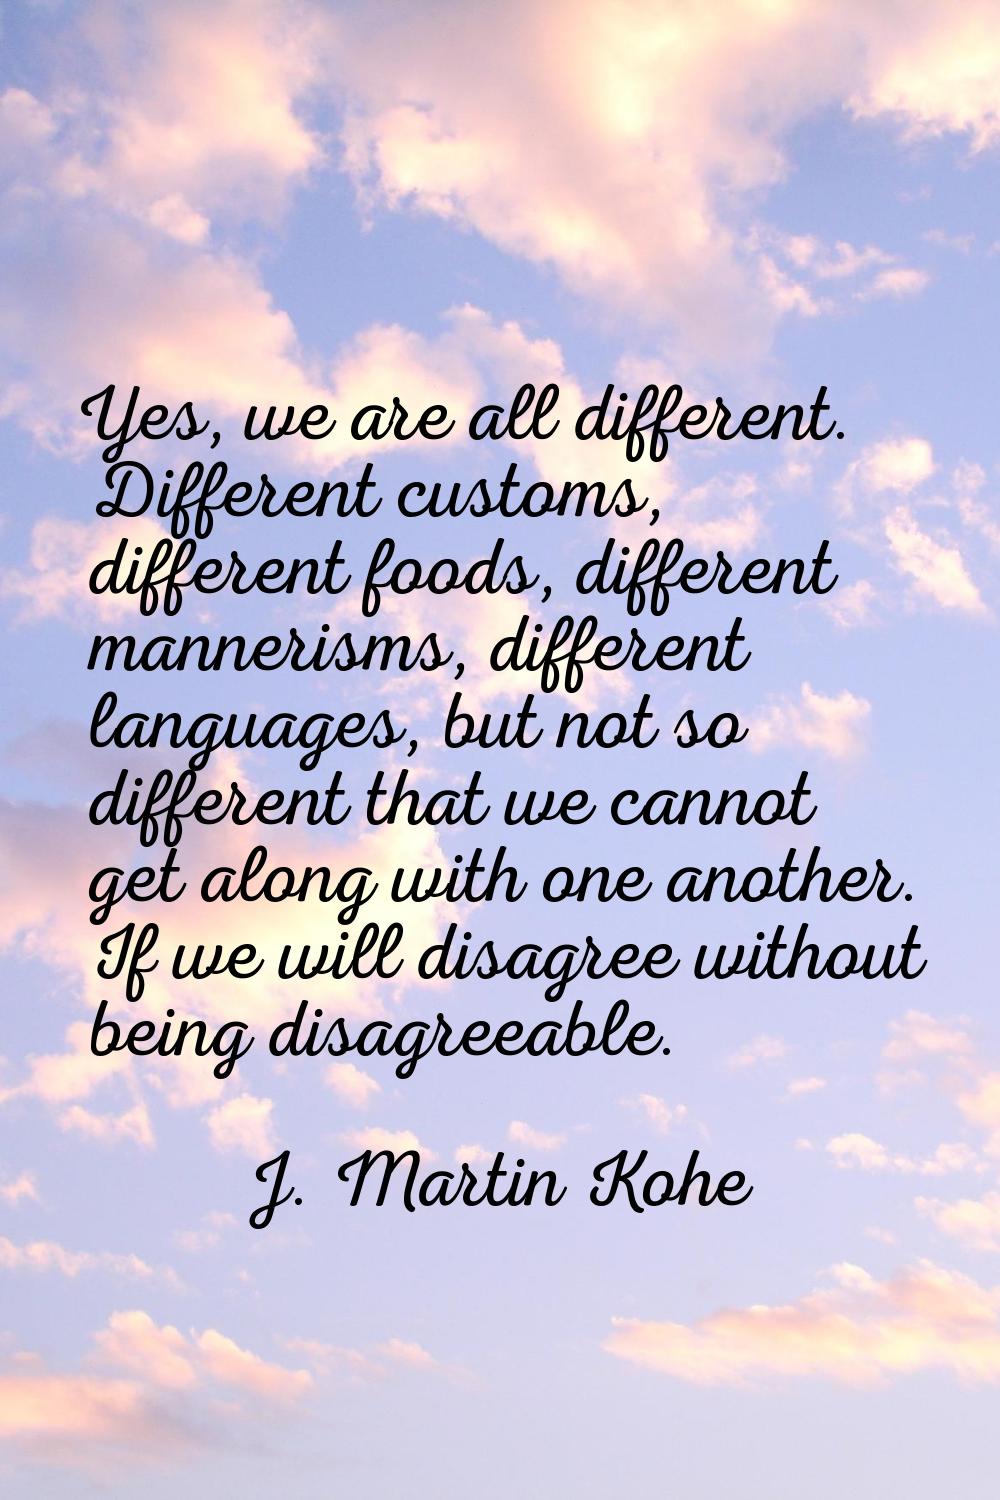 Yes, we are all different. Different customs, different foods, different mannerisms, different lang